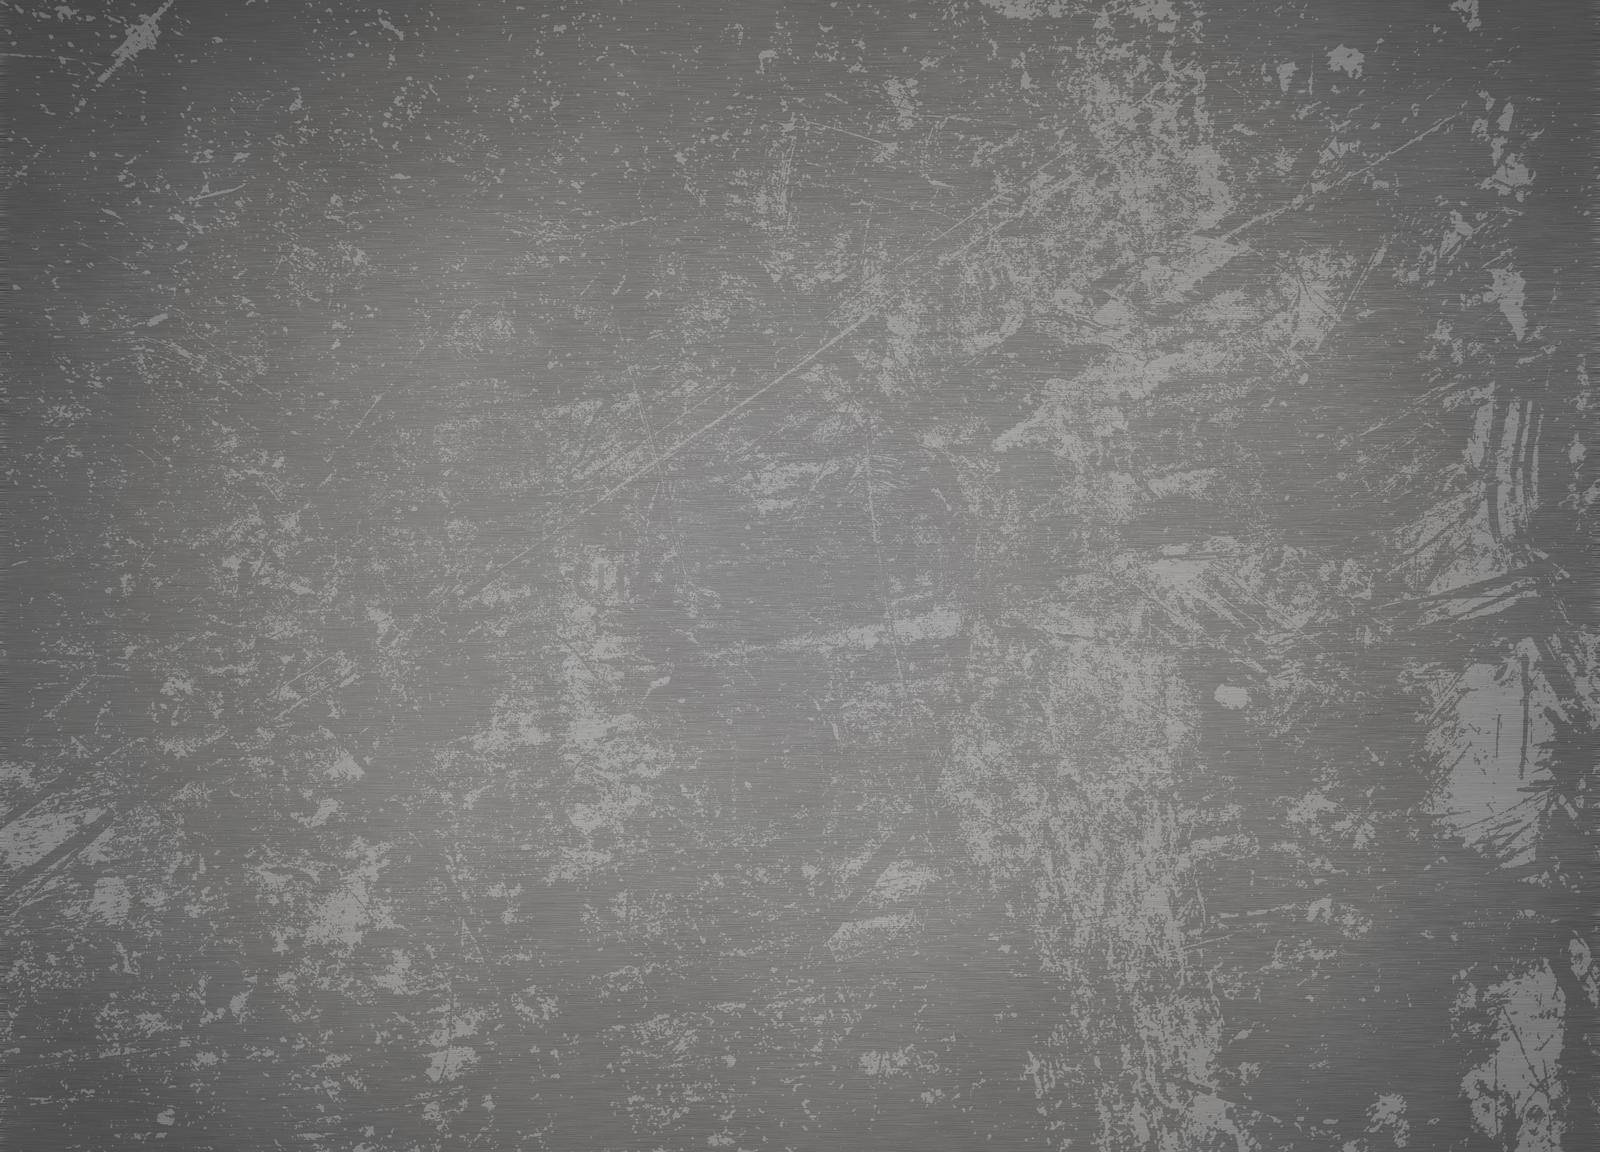 Background texture of old worn brushed silver, steel or aluminum metal surface with weathred stains